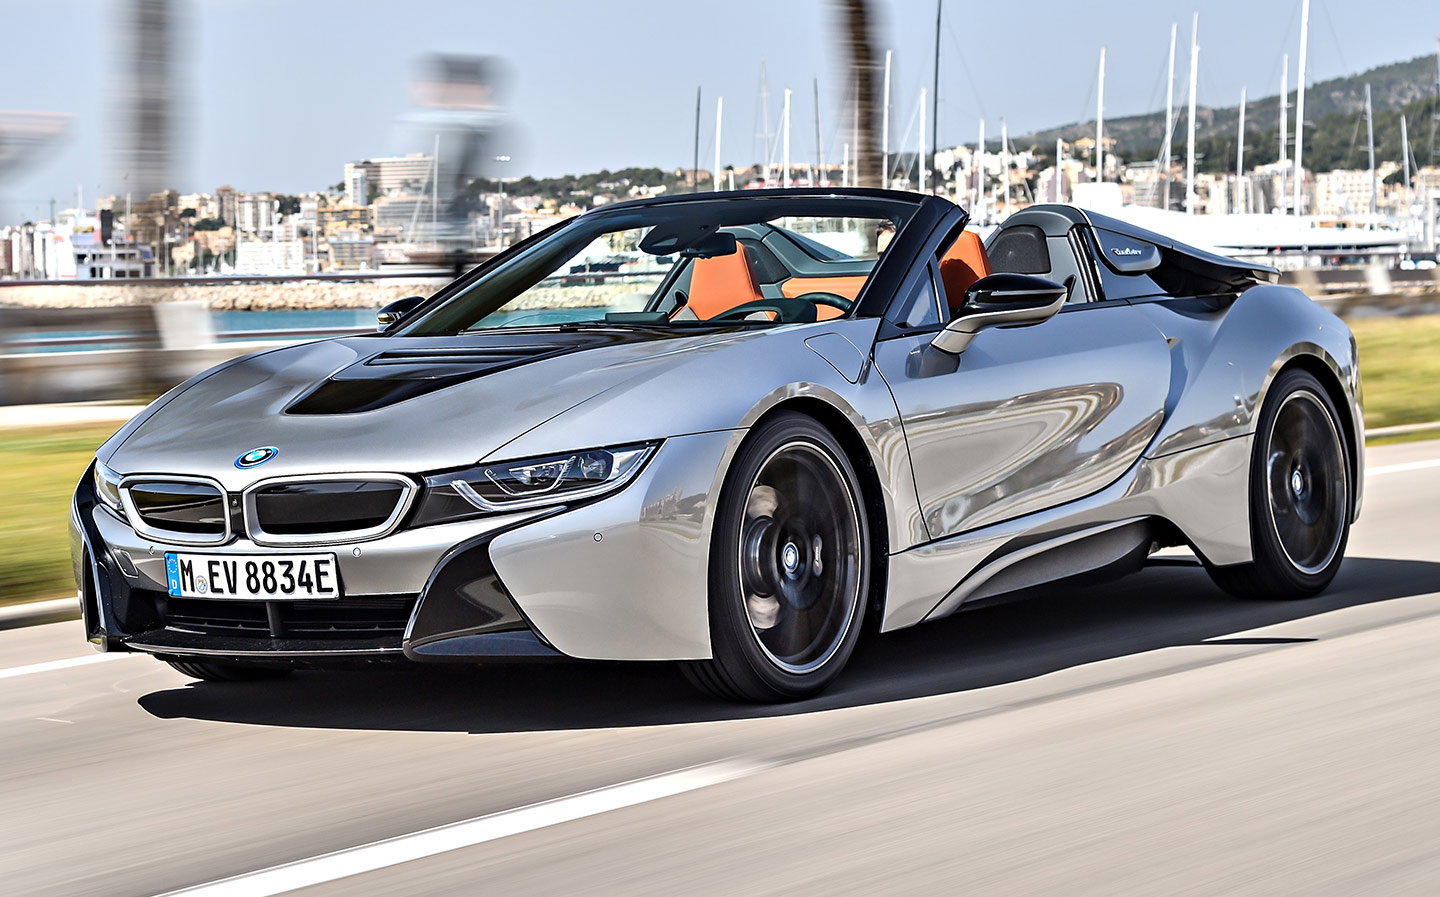 2018 BMW i8 Roadster video review by Mat Watson for Carwow/ Sunday Times Driving.